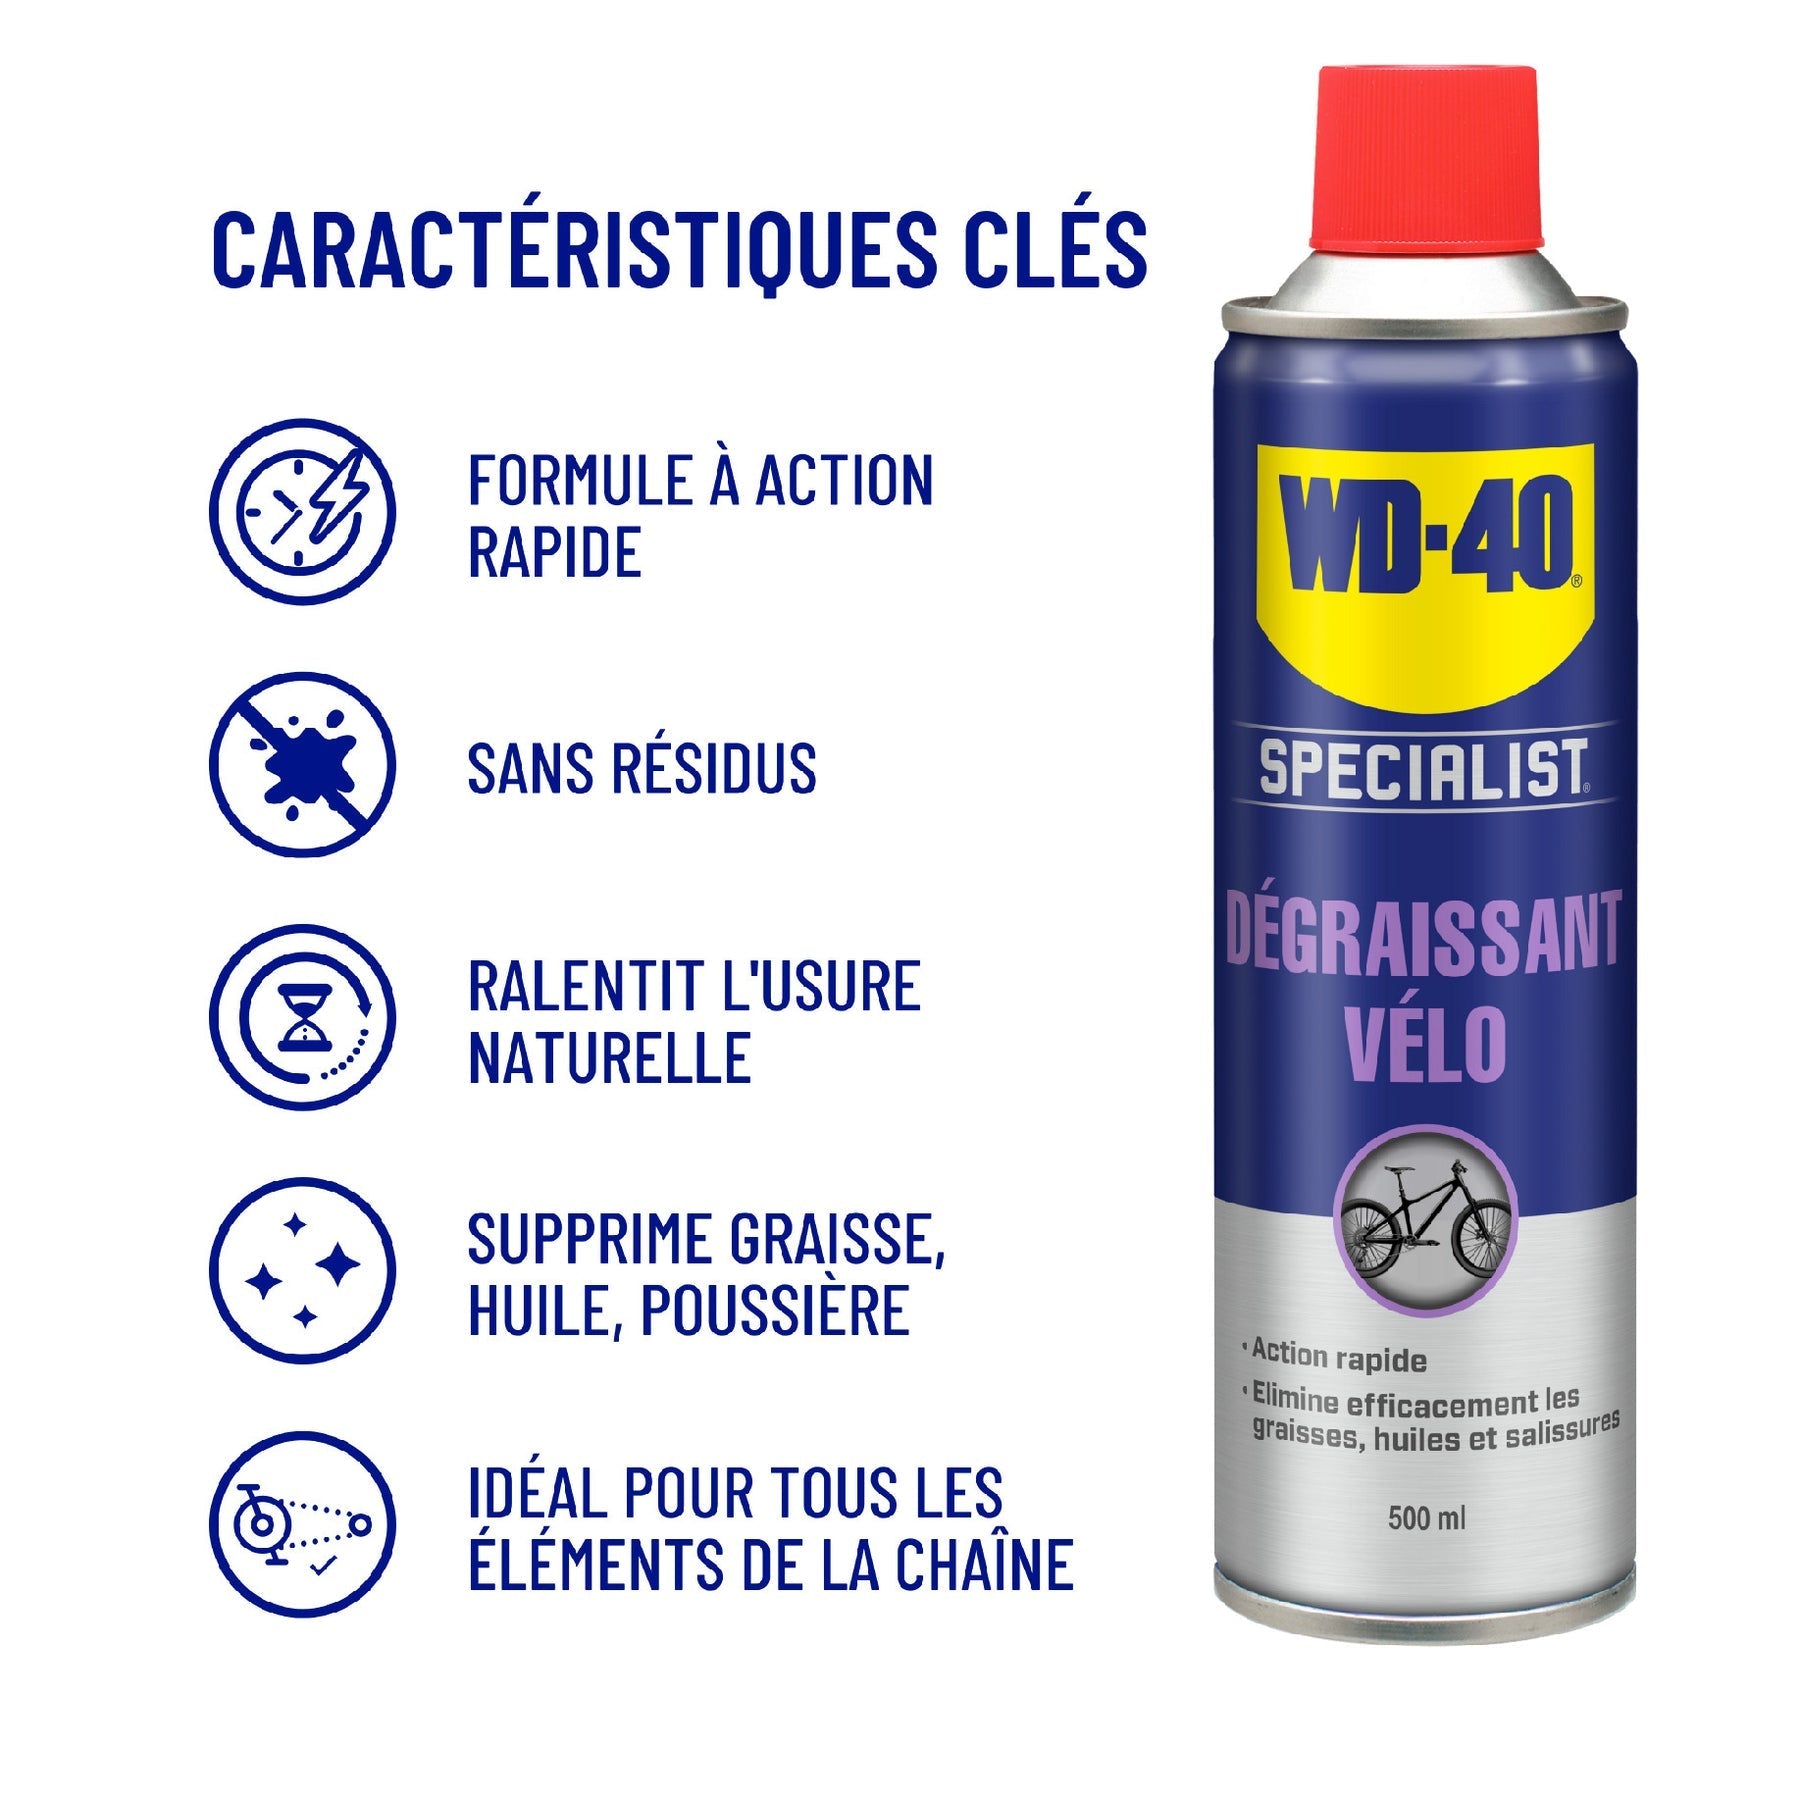 WD 40 - Bicycle chain degreaser